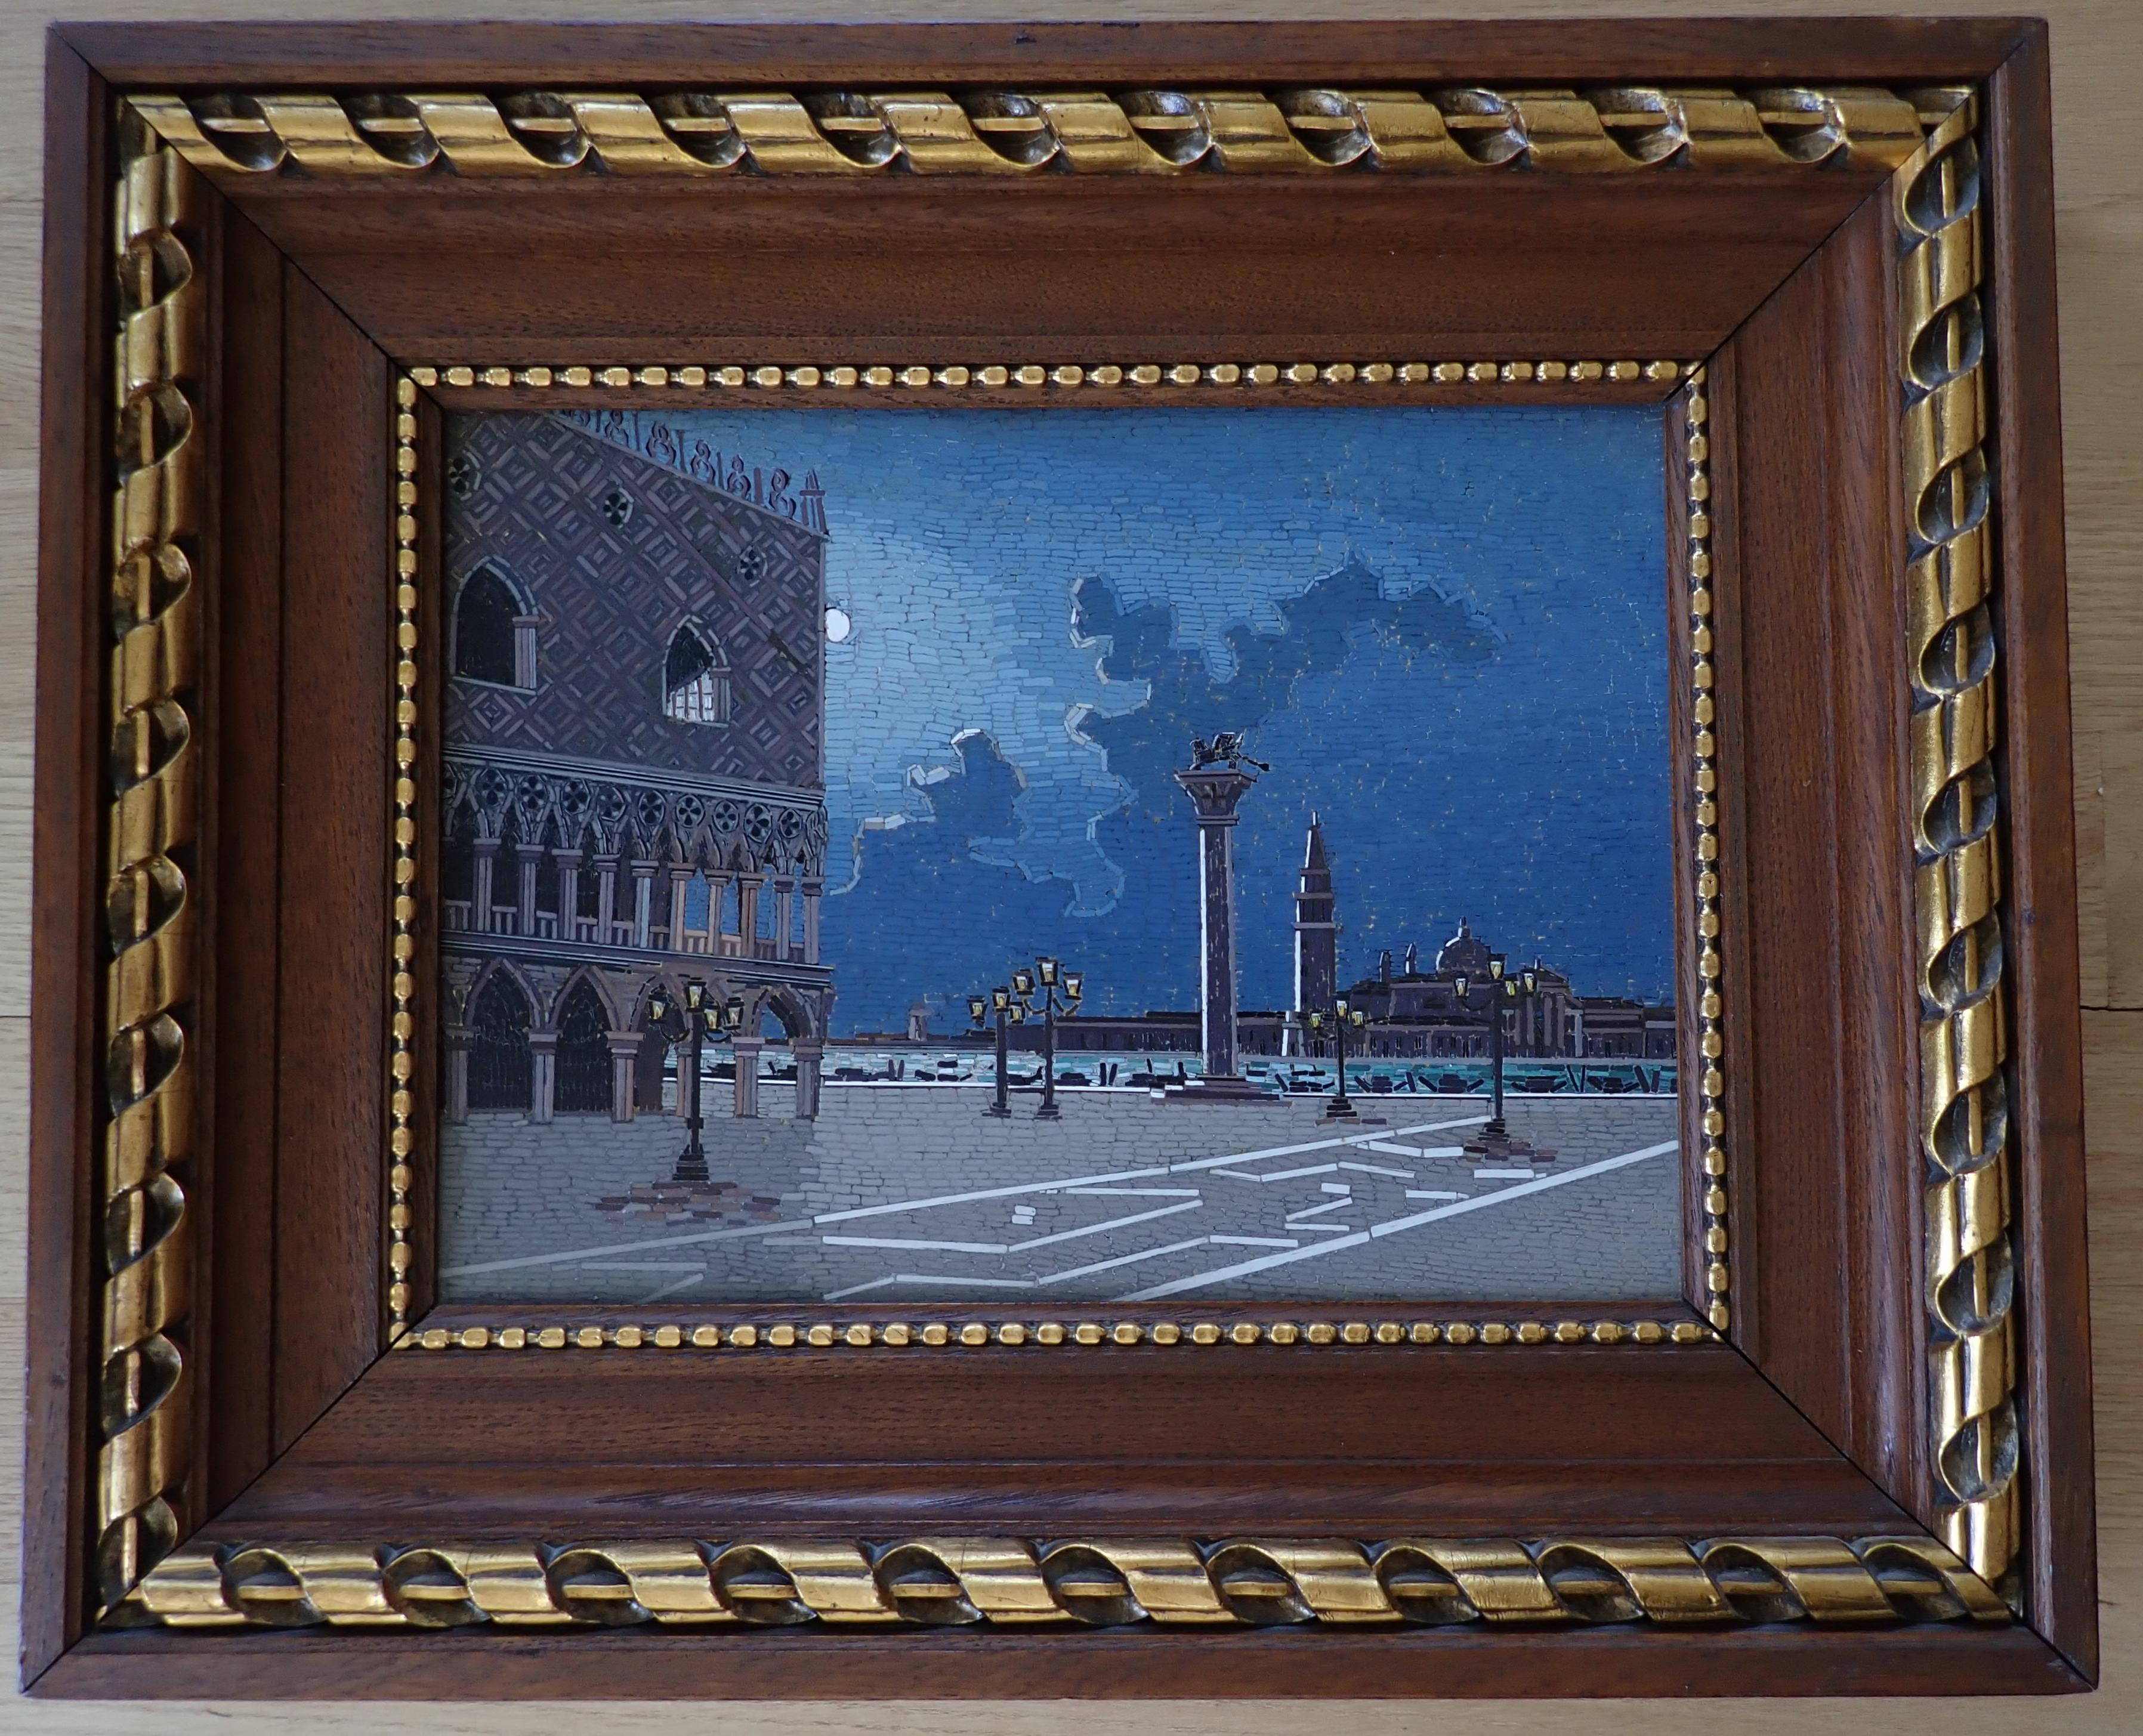 Italian Micromosaic Plaque of Venice. 19th century Italian micro mosaic (micromosaic) plaque. The image depicts St. Marks Square, Venice. The Venetian scene is highlighted by a beautiful moon lit evening sky.
Image size approx. 14 x 10.


   